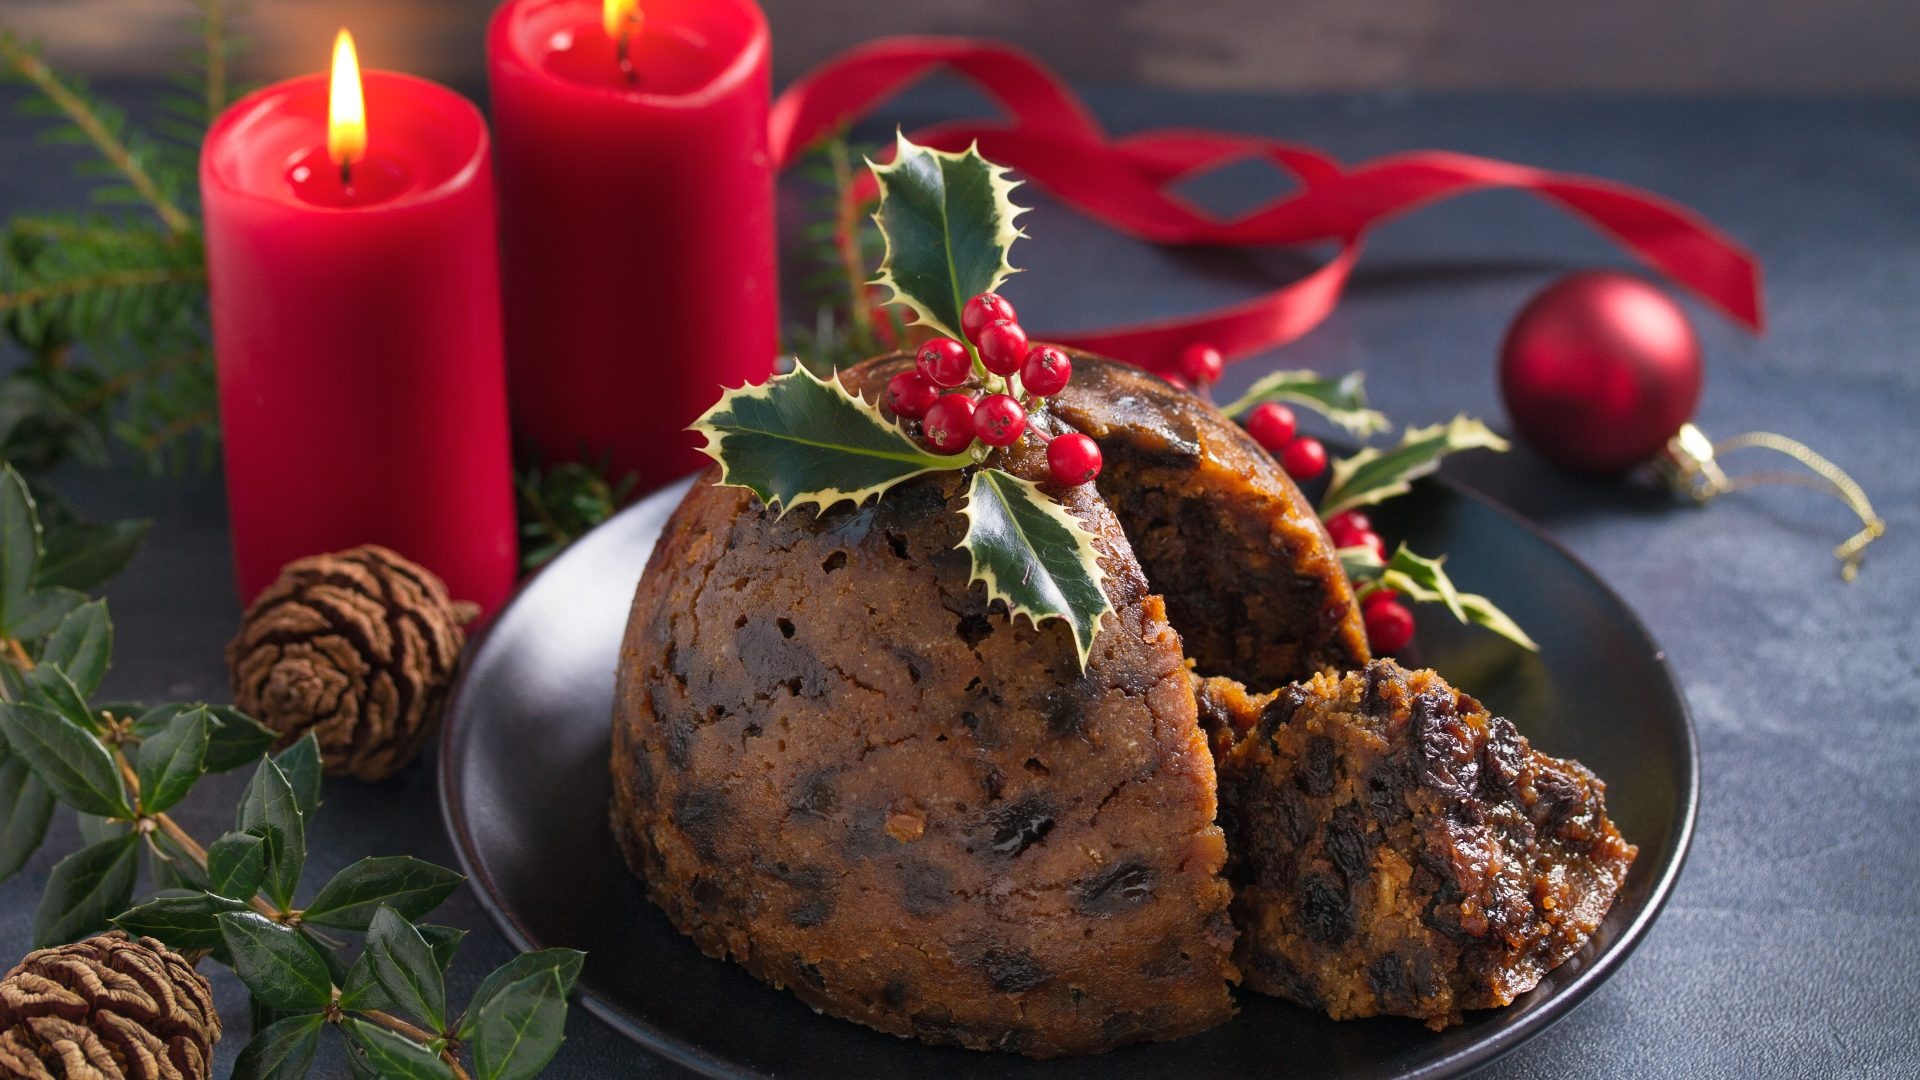 Royal family's Christmas pudding, Official recipe, Regal holiday tradition, Rich and flavorful, 1920x1080 Full HD Desktop